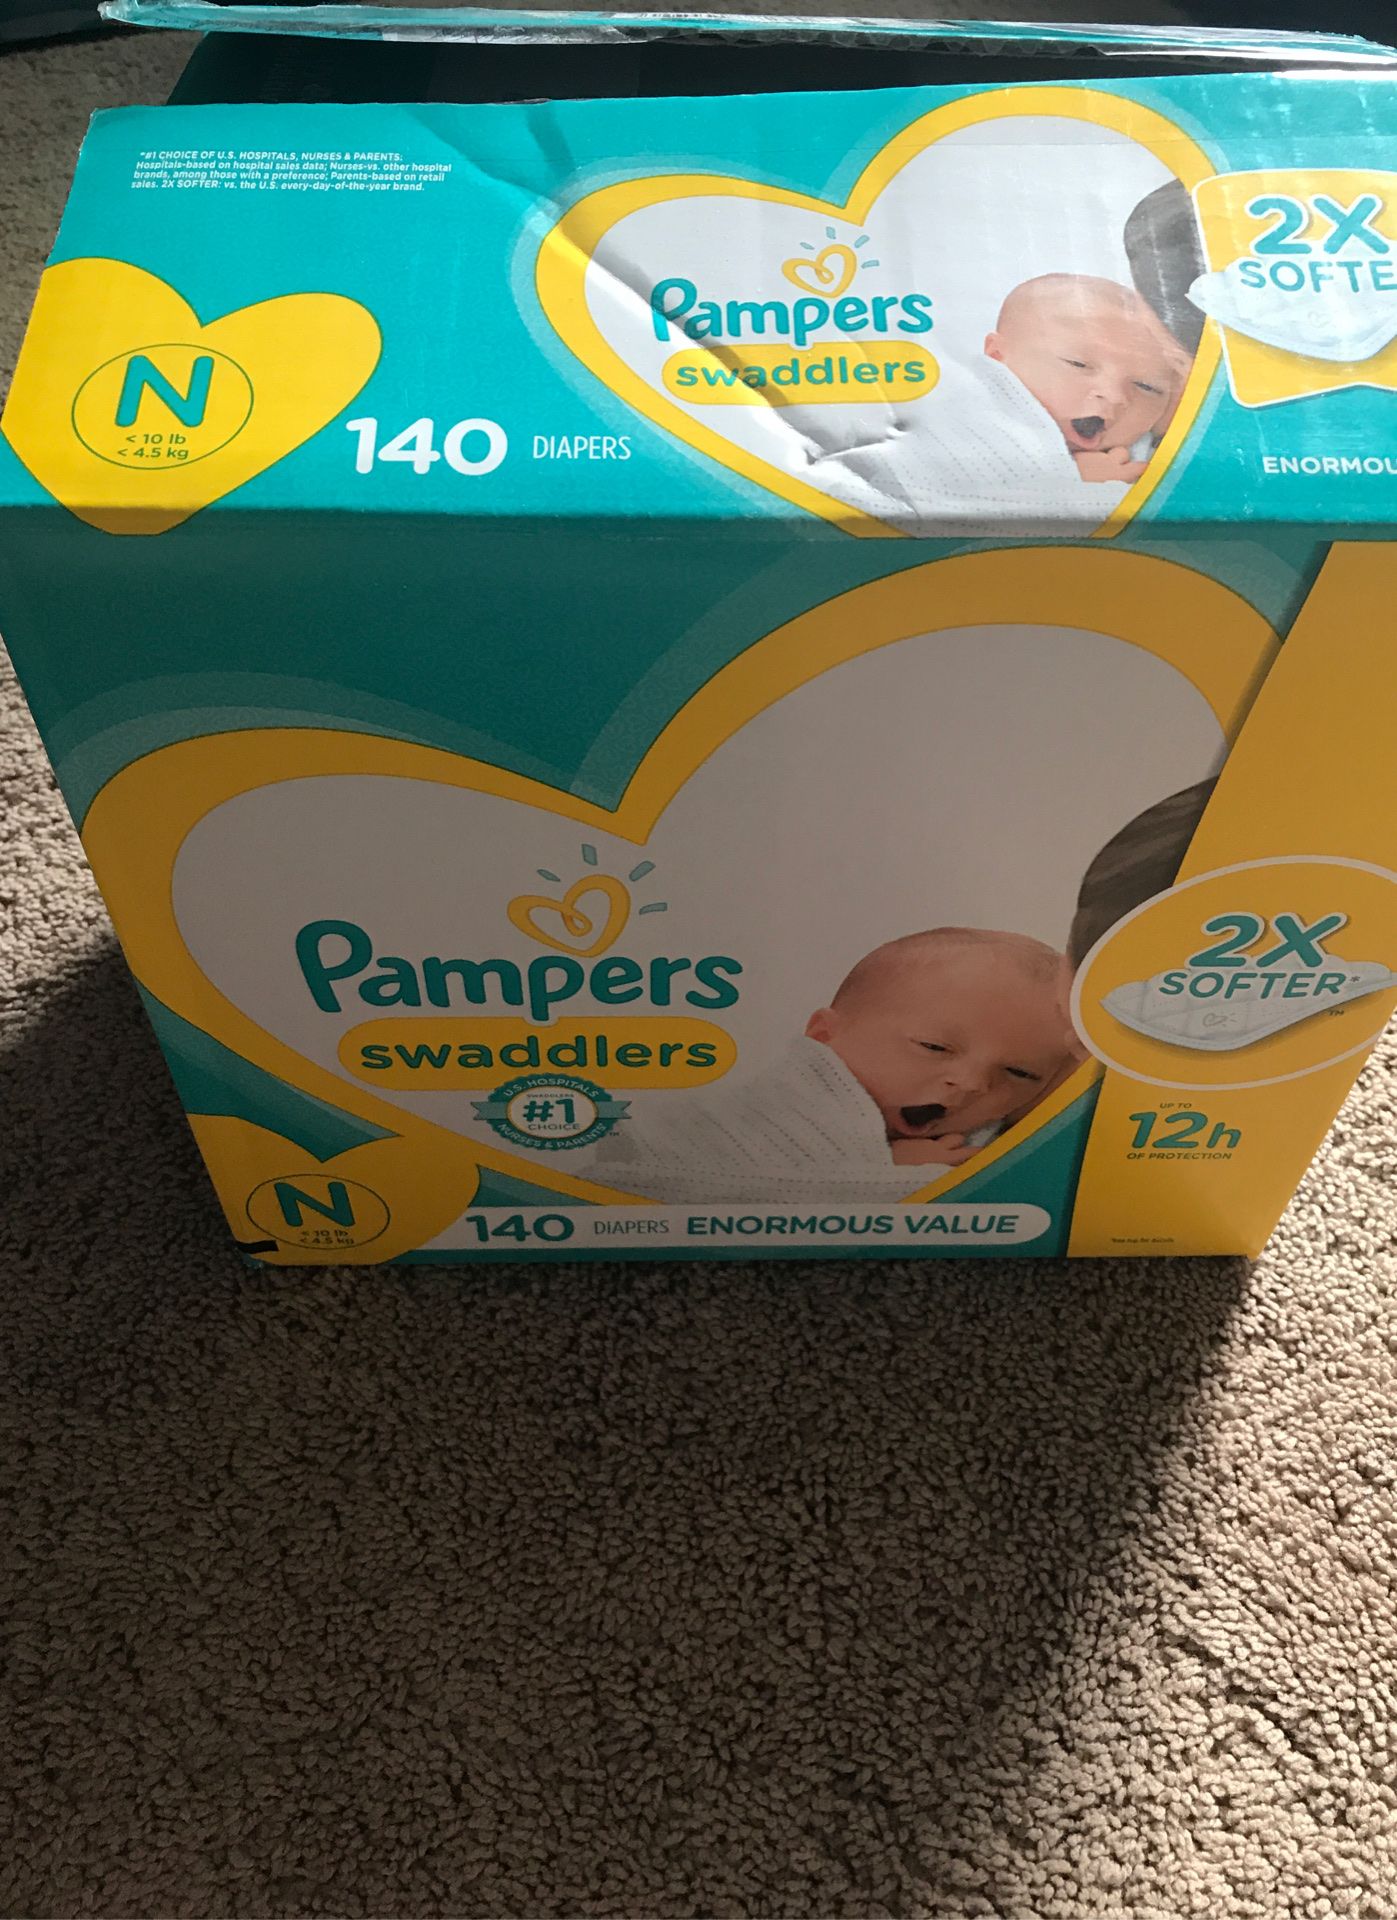 Pampers swaddlers Newborn opened box 129 count